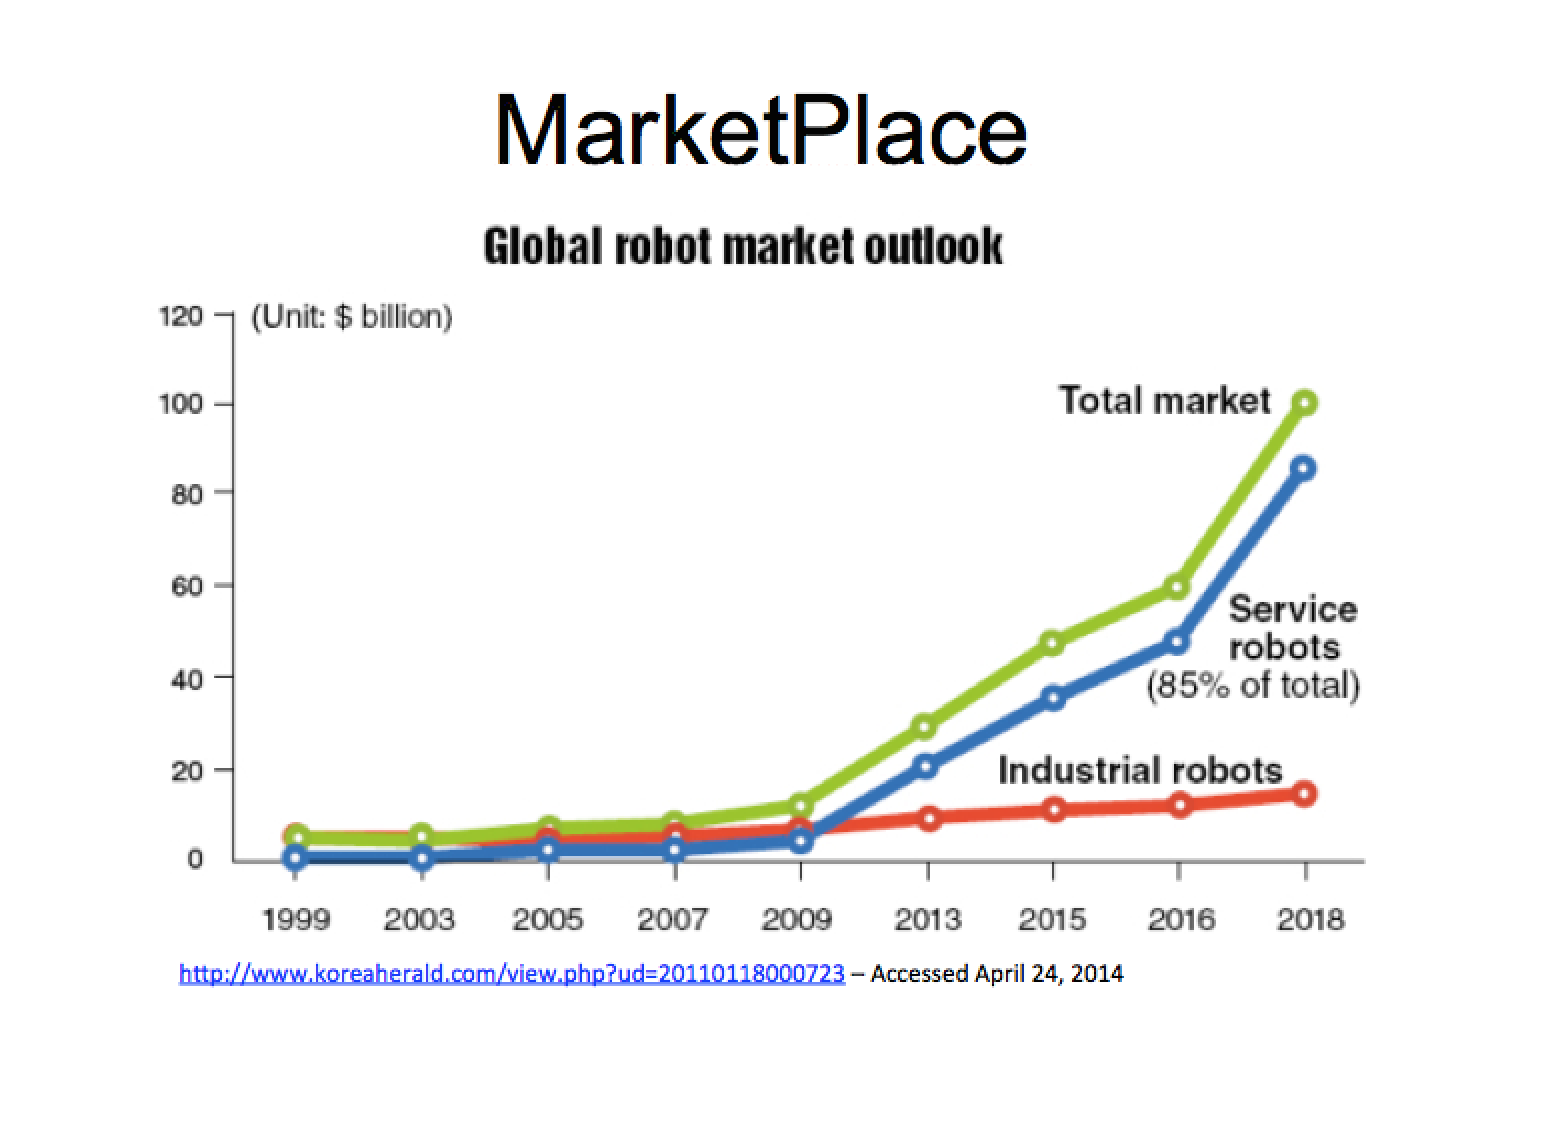 Growth in sales of service robots